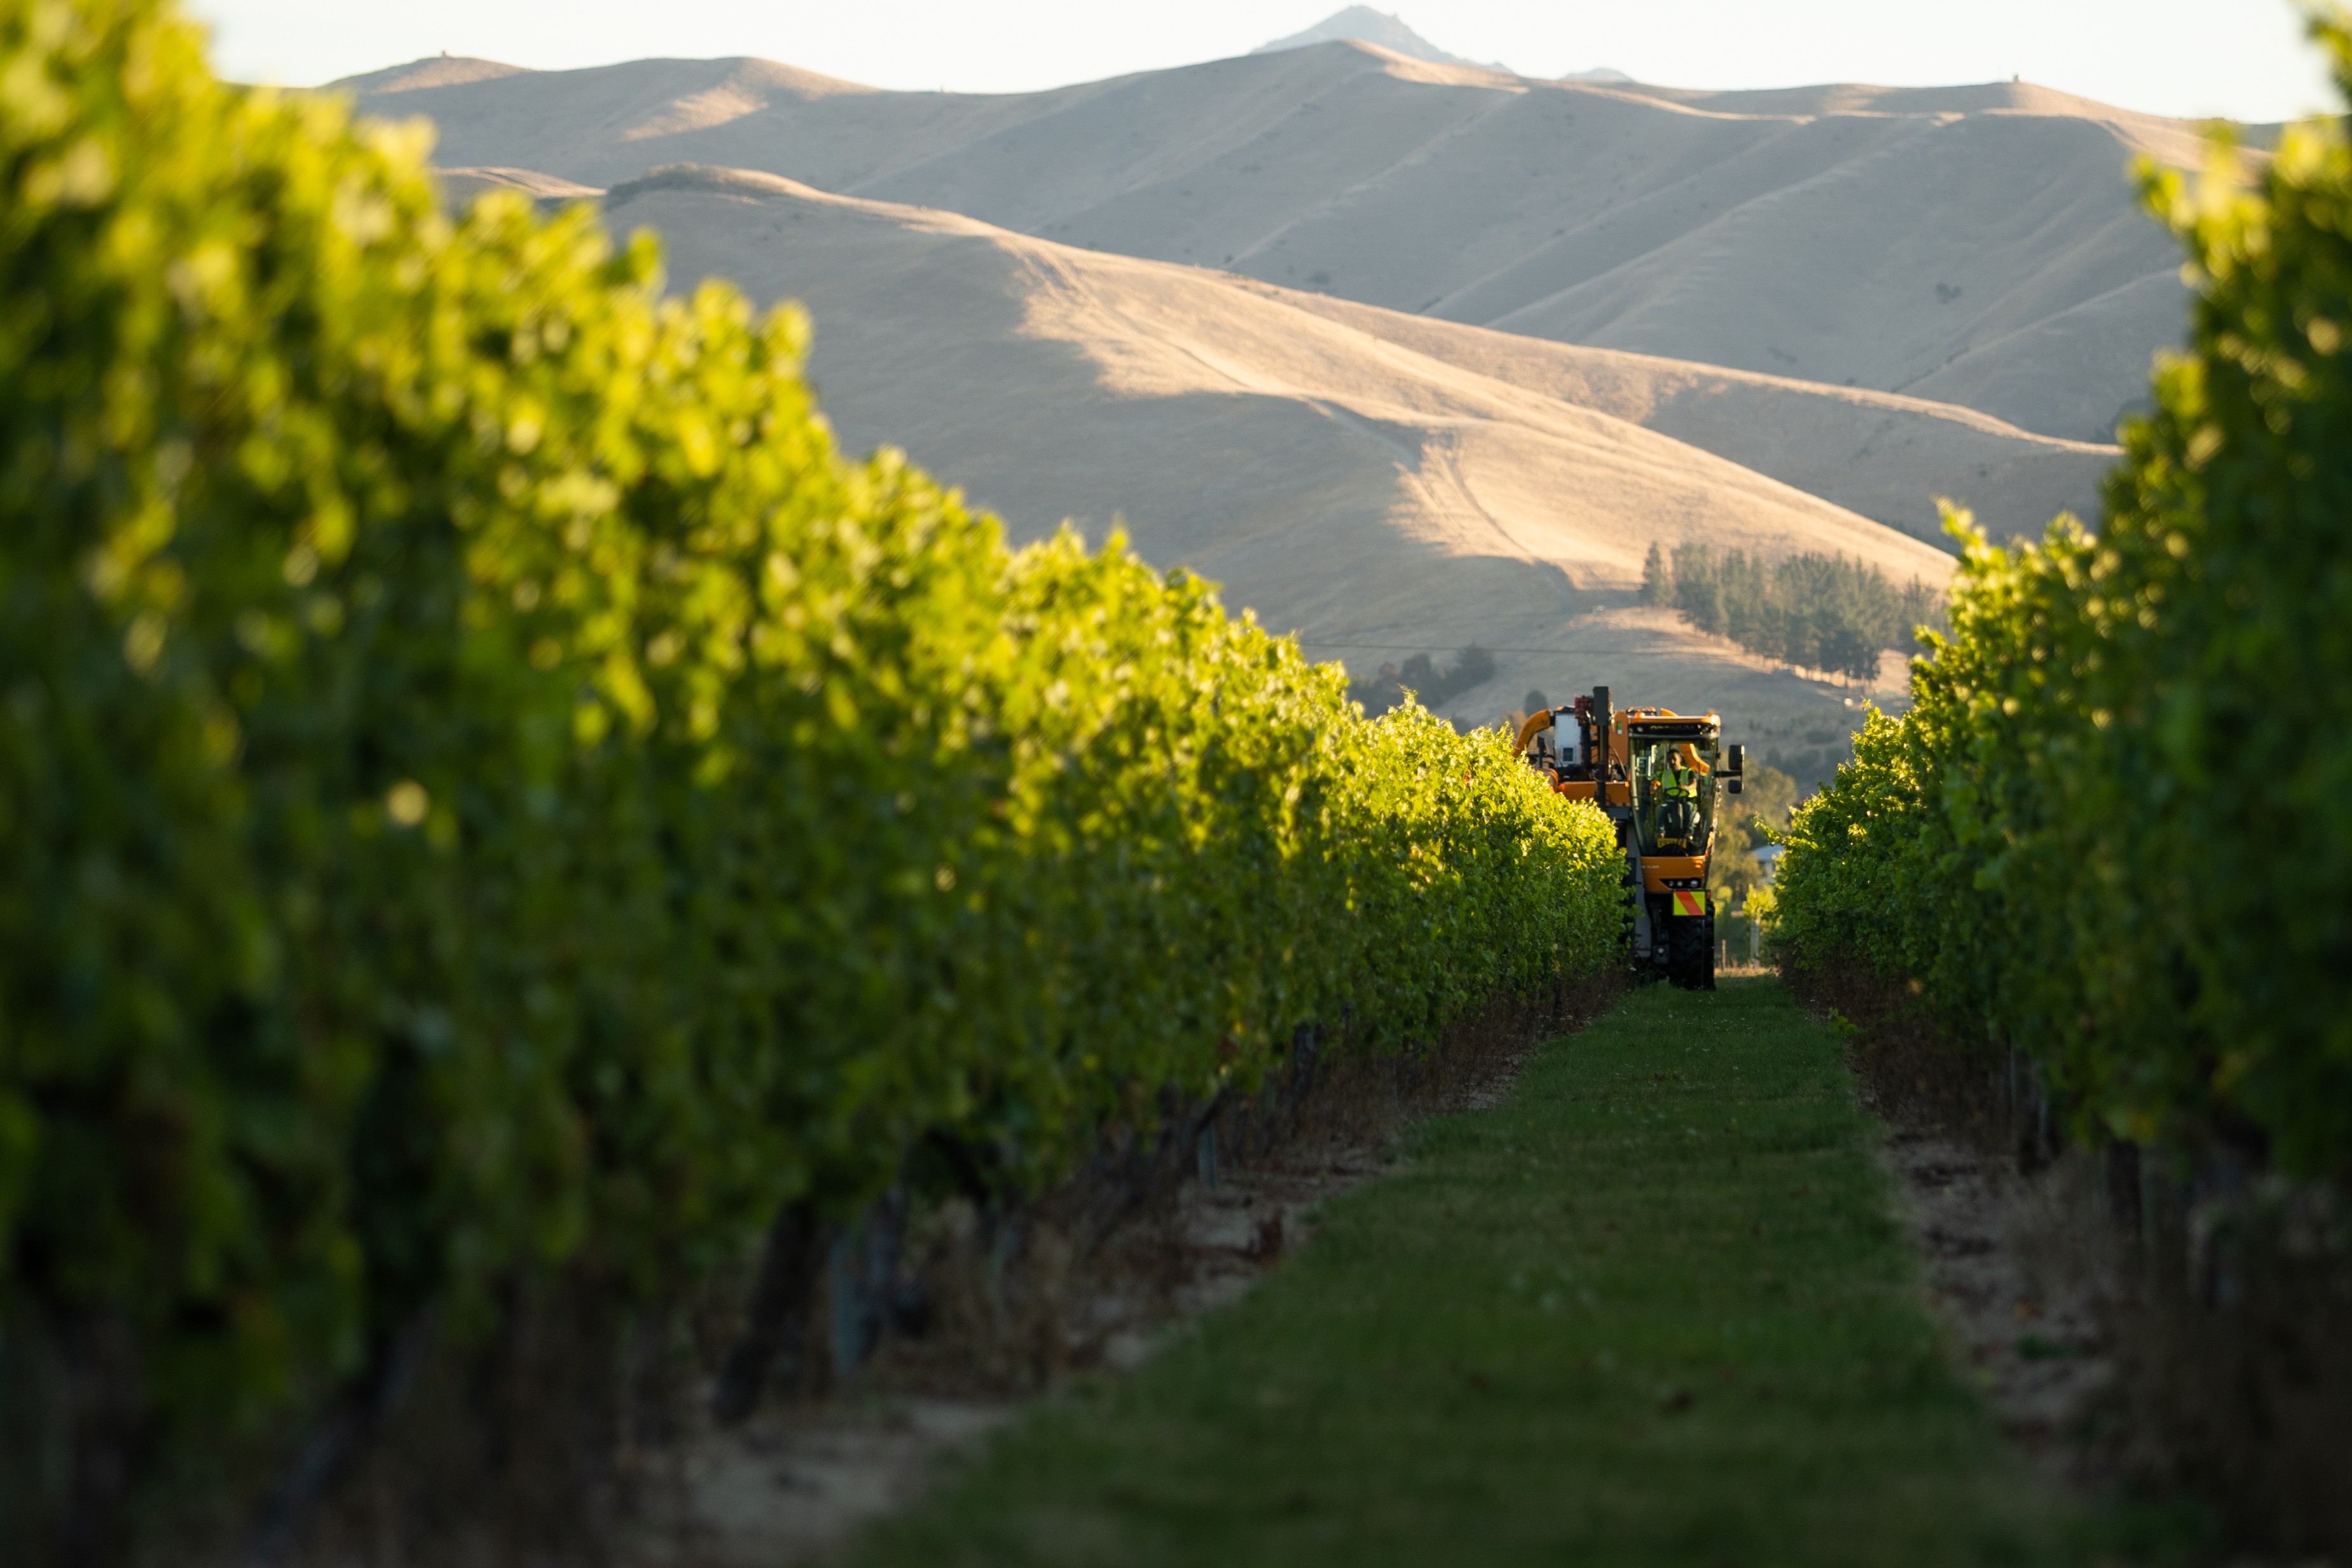 Horticulture and viticulture jobs in new zealand